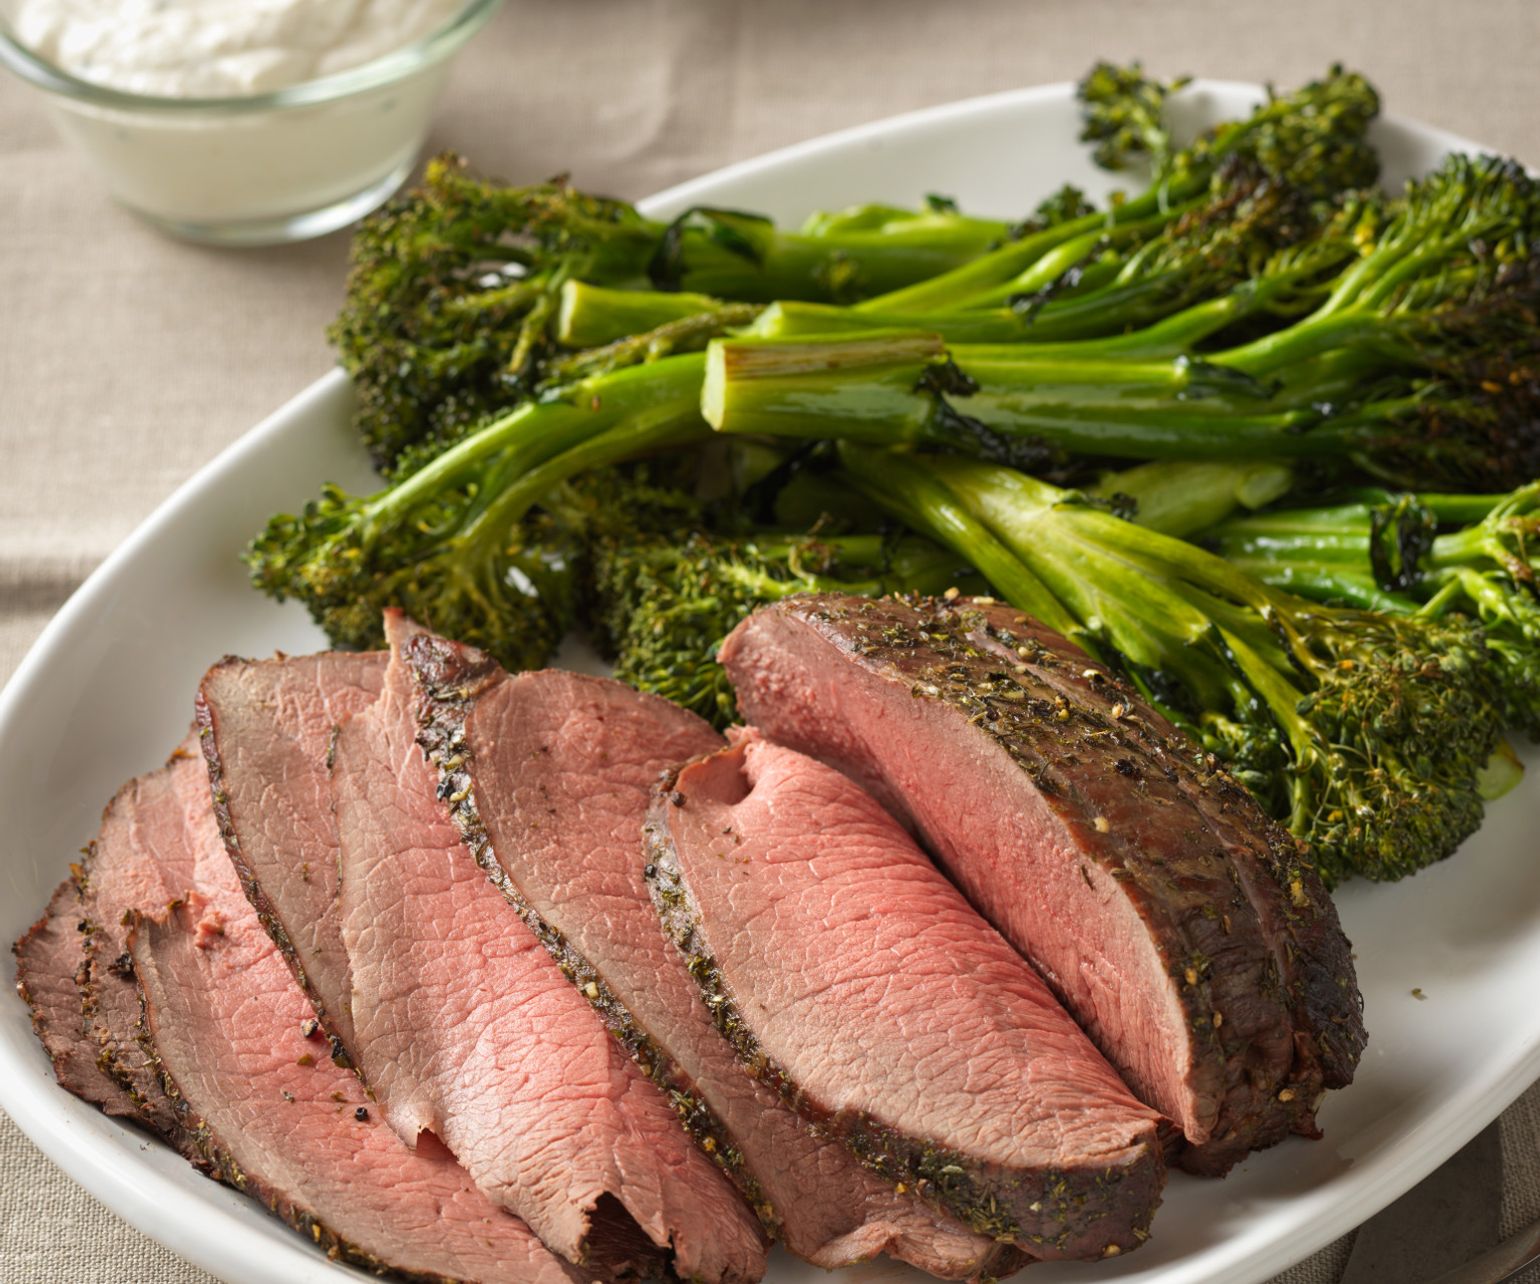 Herb-Crusted Sirloin Tip Roast with Creamy Horseradish-Chive Sauce